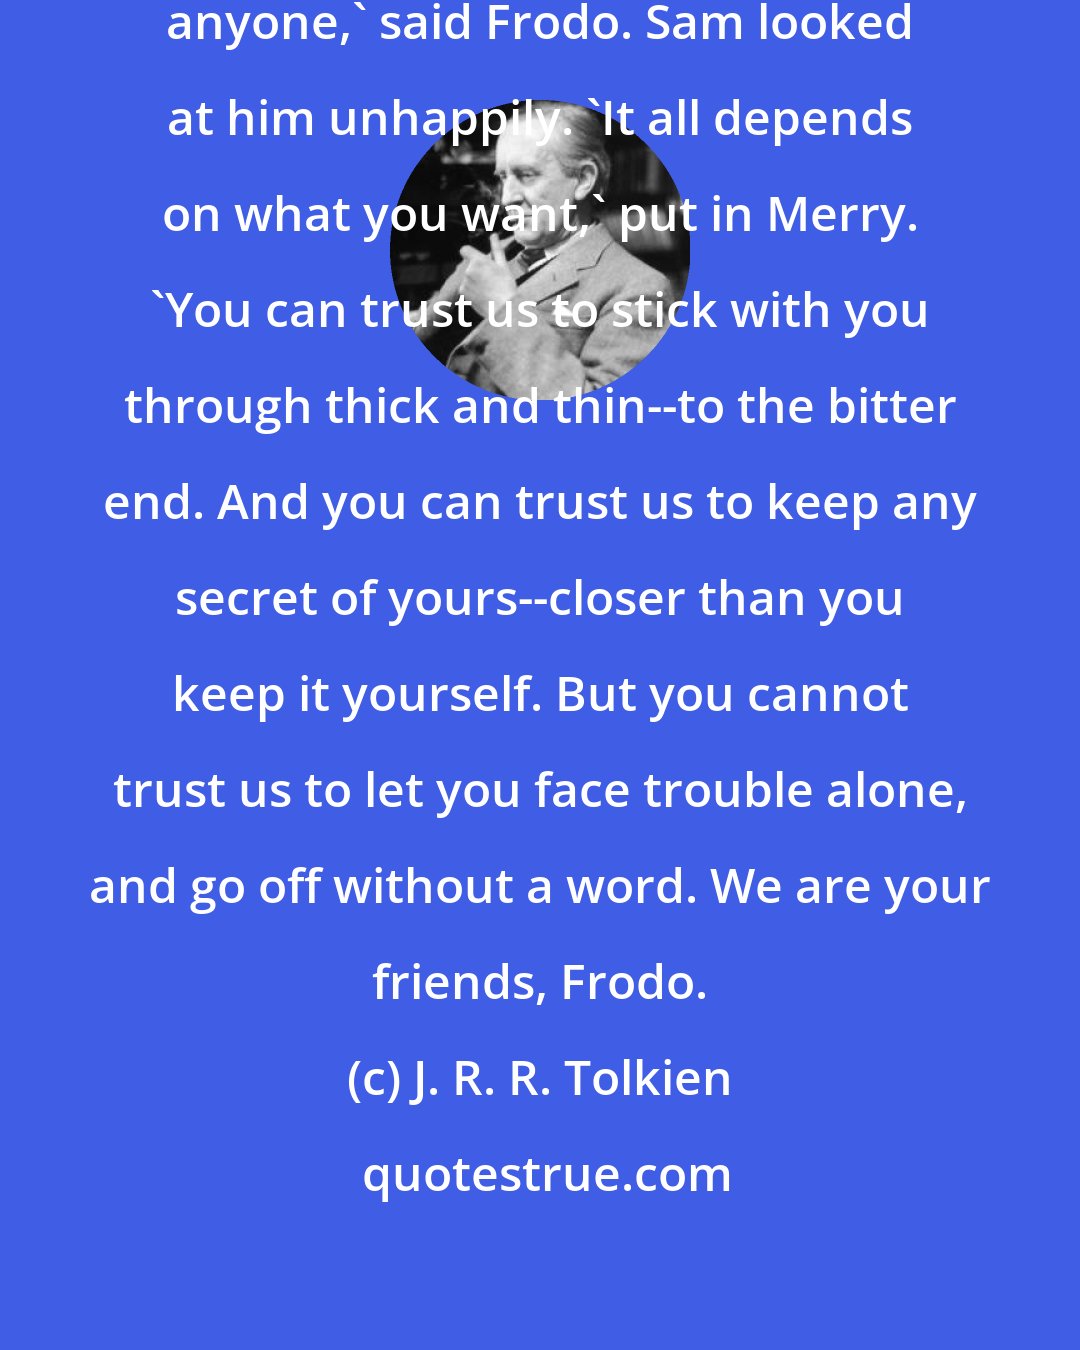 J. R. R. Tolkien: But it does not seem that I can trust anyone,' said Frodo. Sam looked at him unhappily. 'It all depends on what you want,' put in Merry. 'You can trust us to stick with you through thick and thin--to the bitter end. And you can trust us to keep any secret of yours--closer than you keep it yourself. But you cannot trust us to let you face trouble alone, and go off without a word. We are your friends, Frodo.